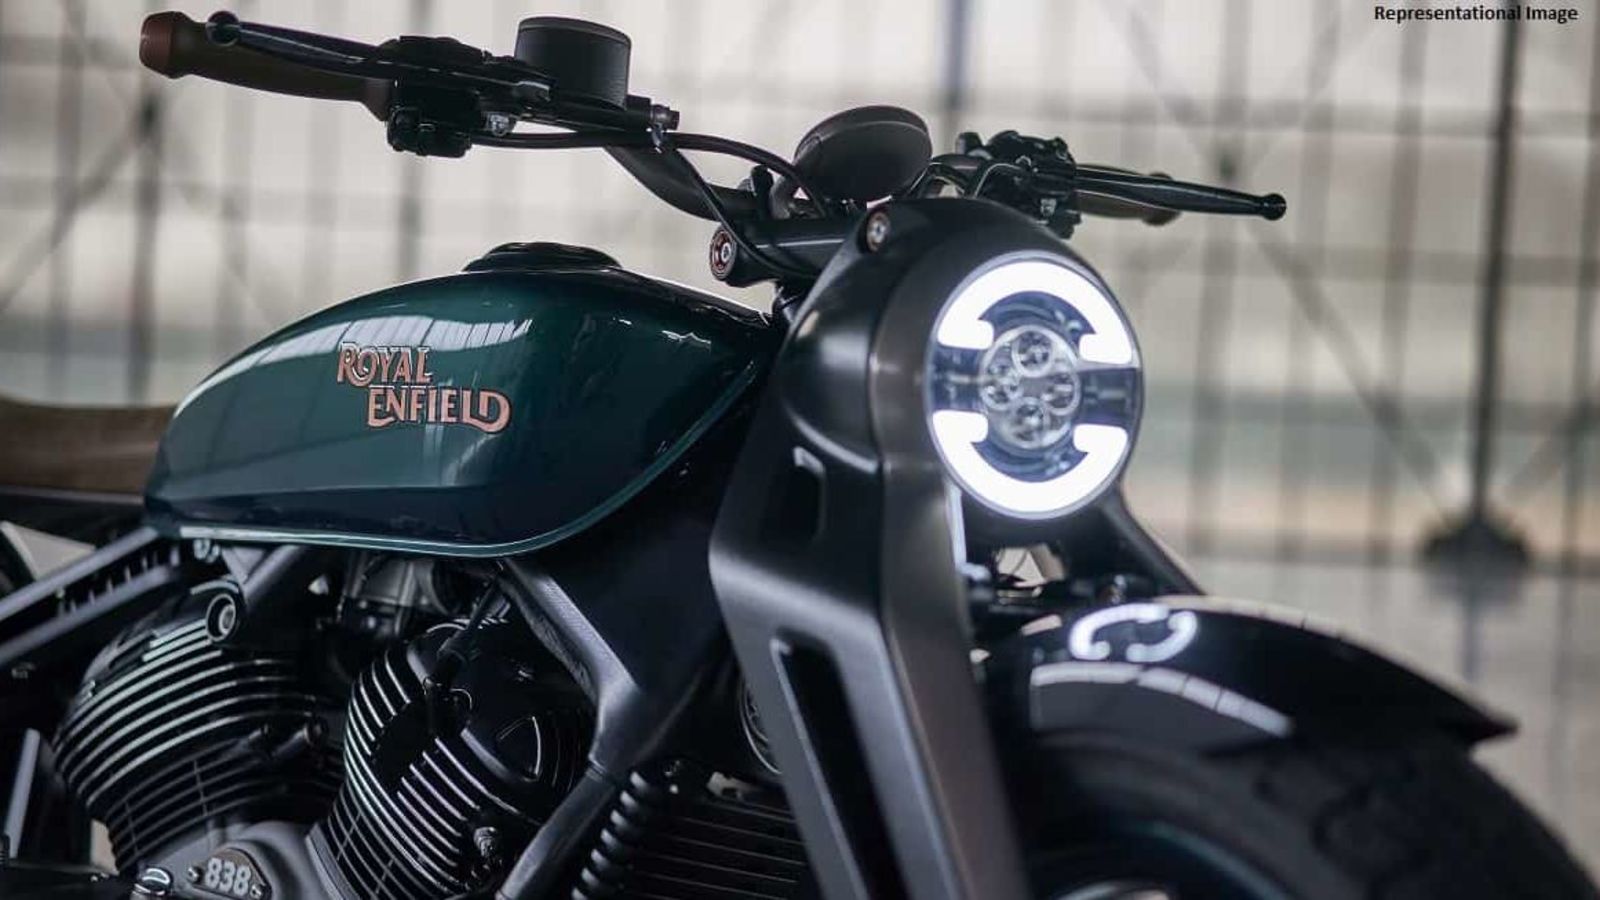 Royal Enfield becomes top mid-size motorcycle company in this ...